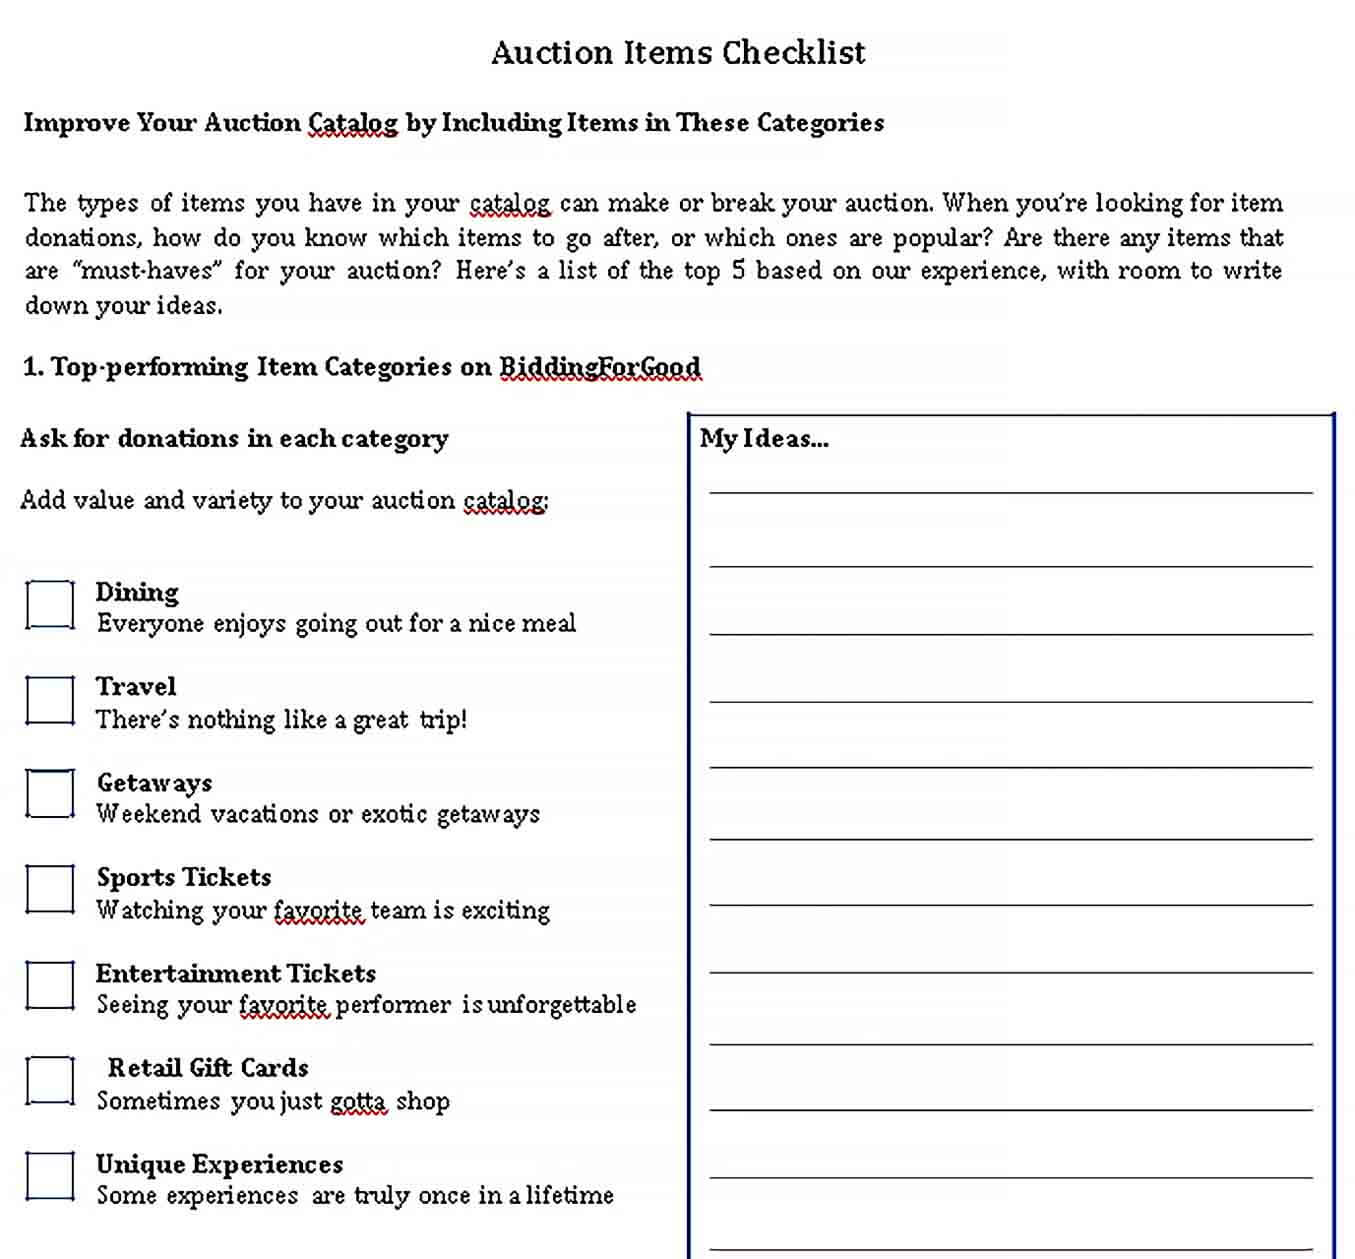 Sample Auction Items Checklist Template